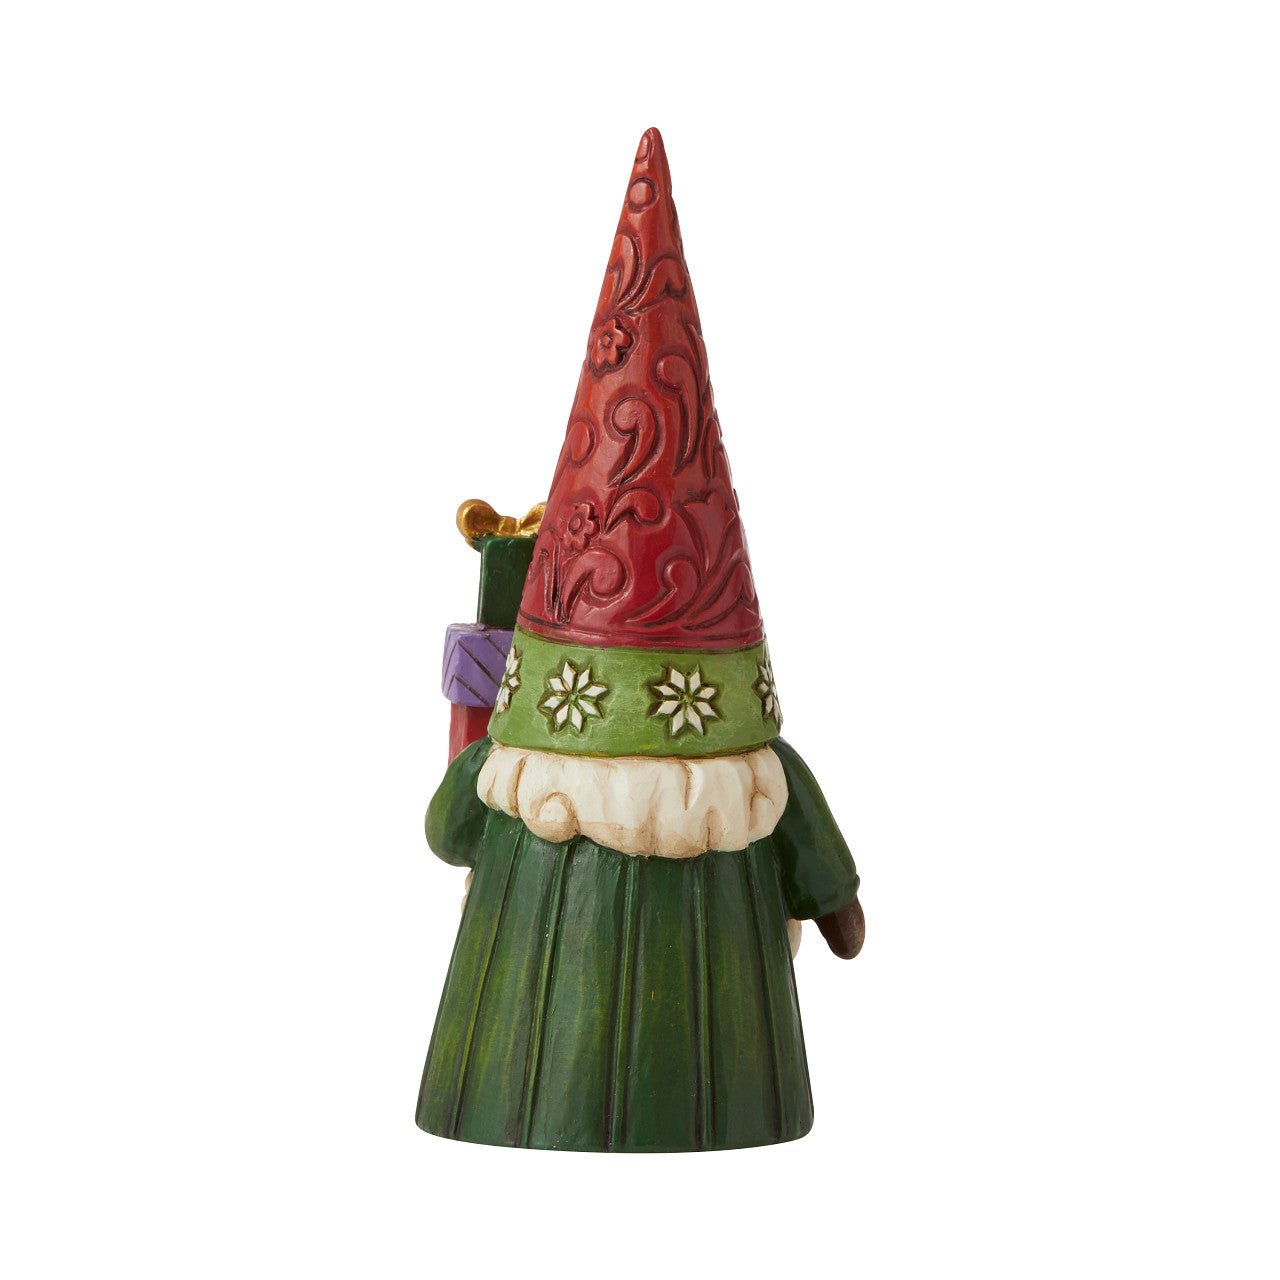 I'll Be Gnome for Christmas - Christmas Gnome Holding Gifts Figurine